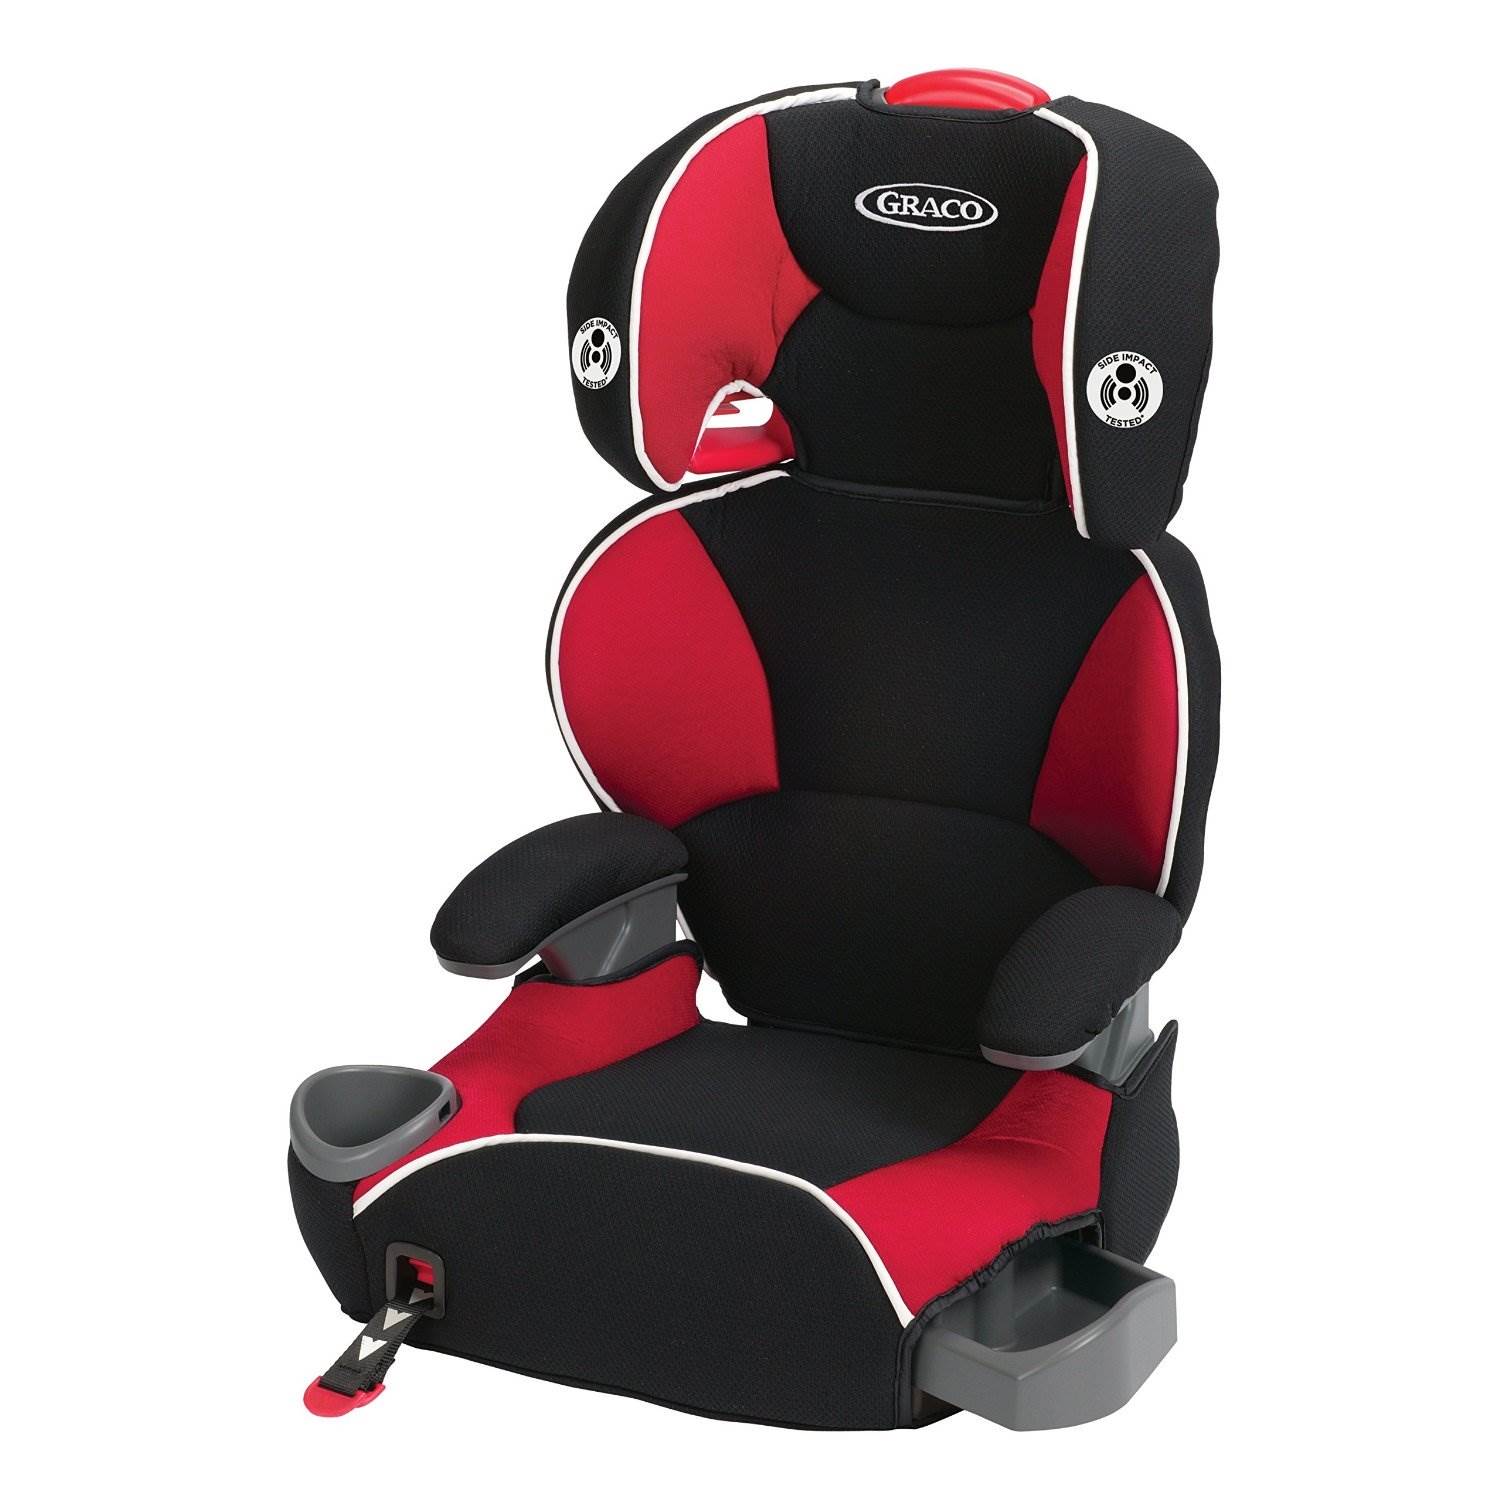 Graco Affix Highback Forward Facing Booster Car Seat with Latch System, Atomic - image 1 of 6